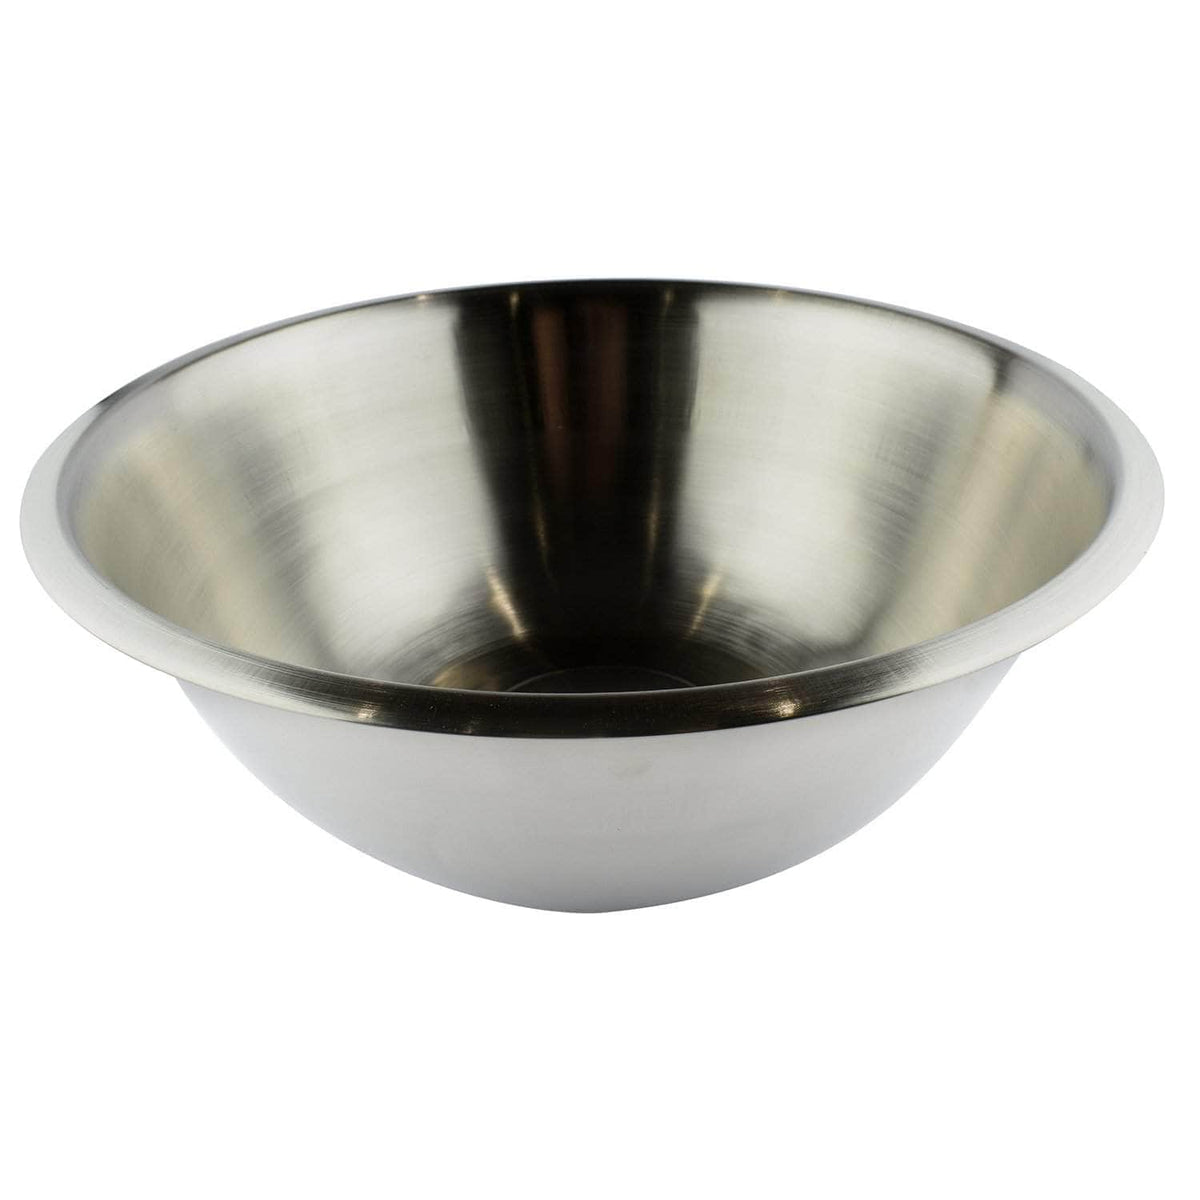 Stainless steel mixing bowl 5 Litre